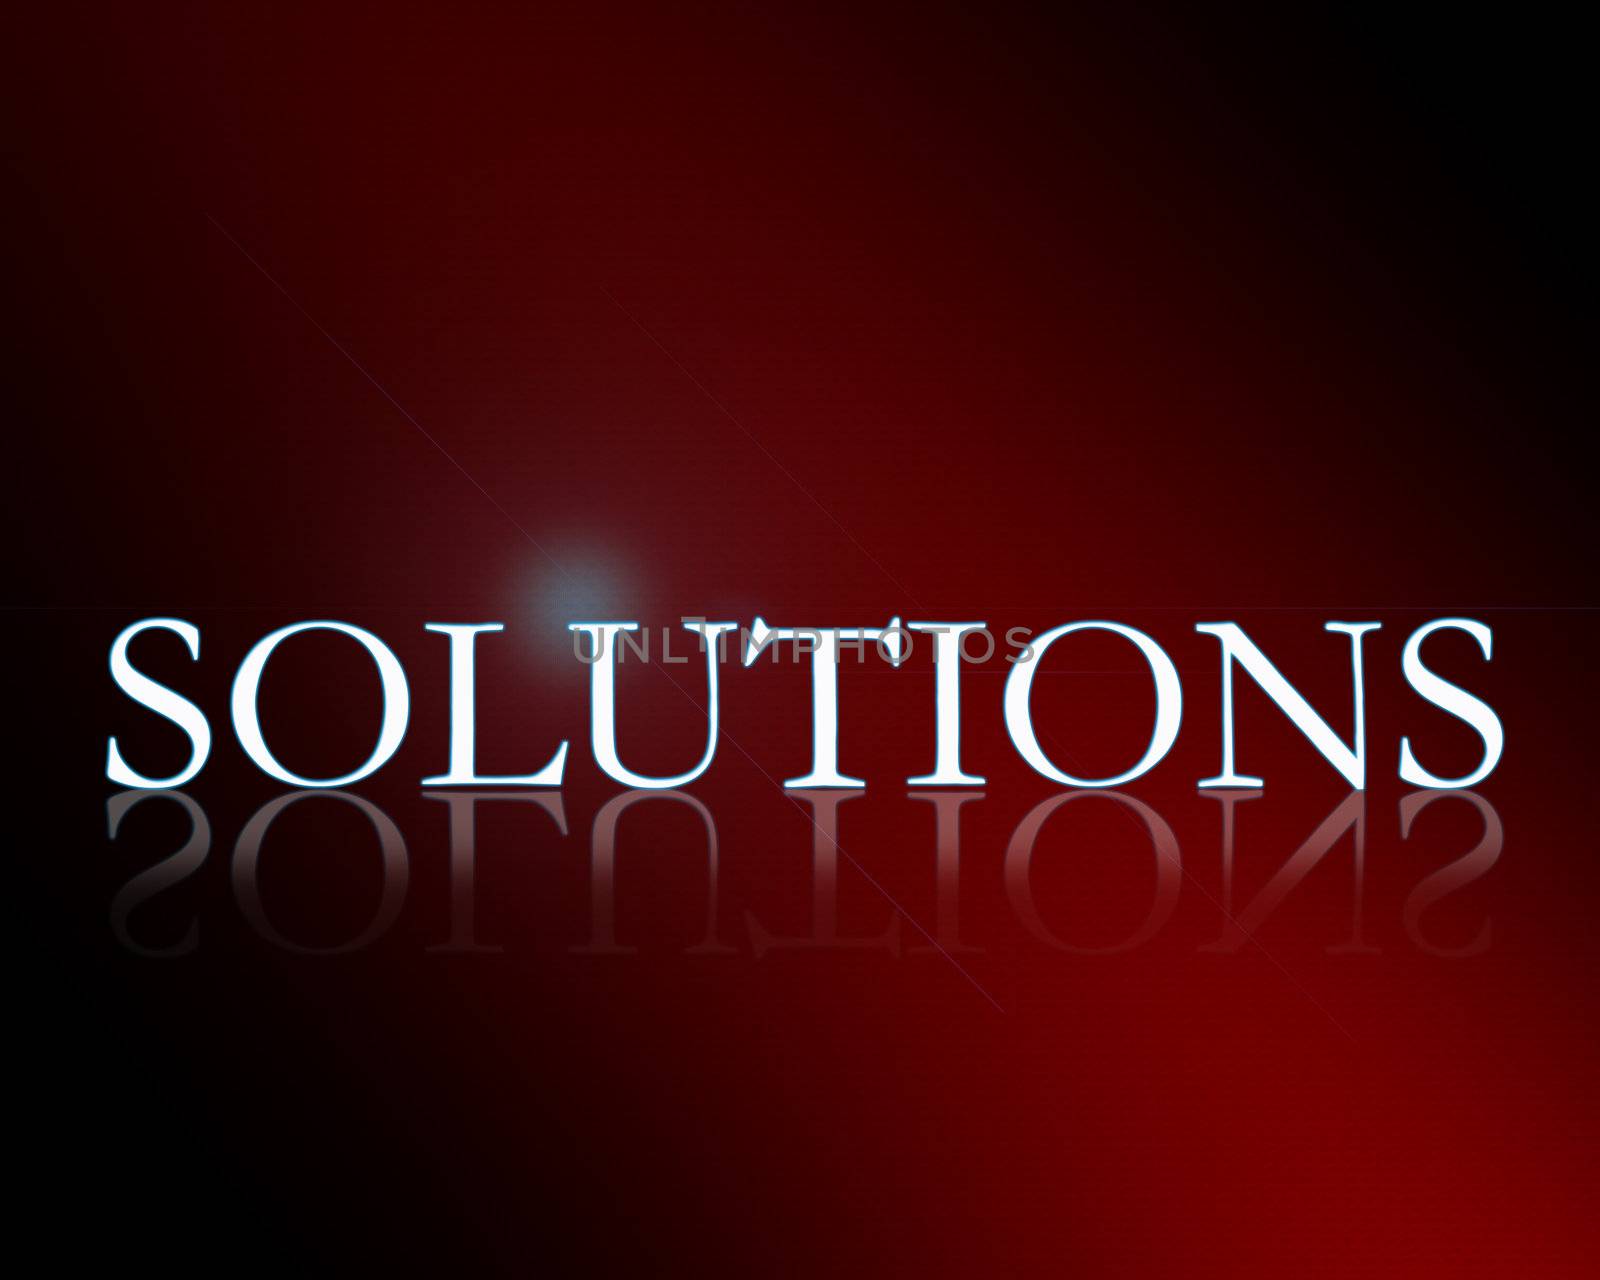 Solution Text illustration 3d high resolution with reflection